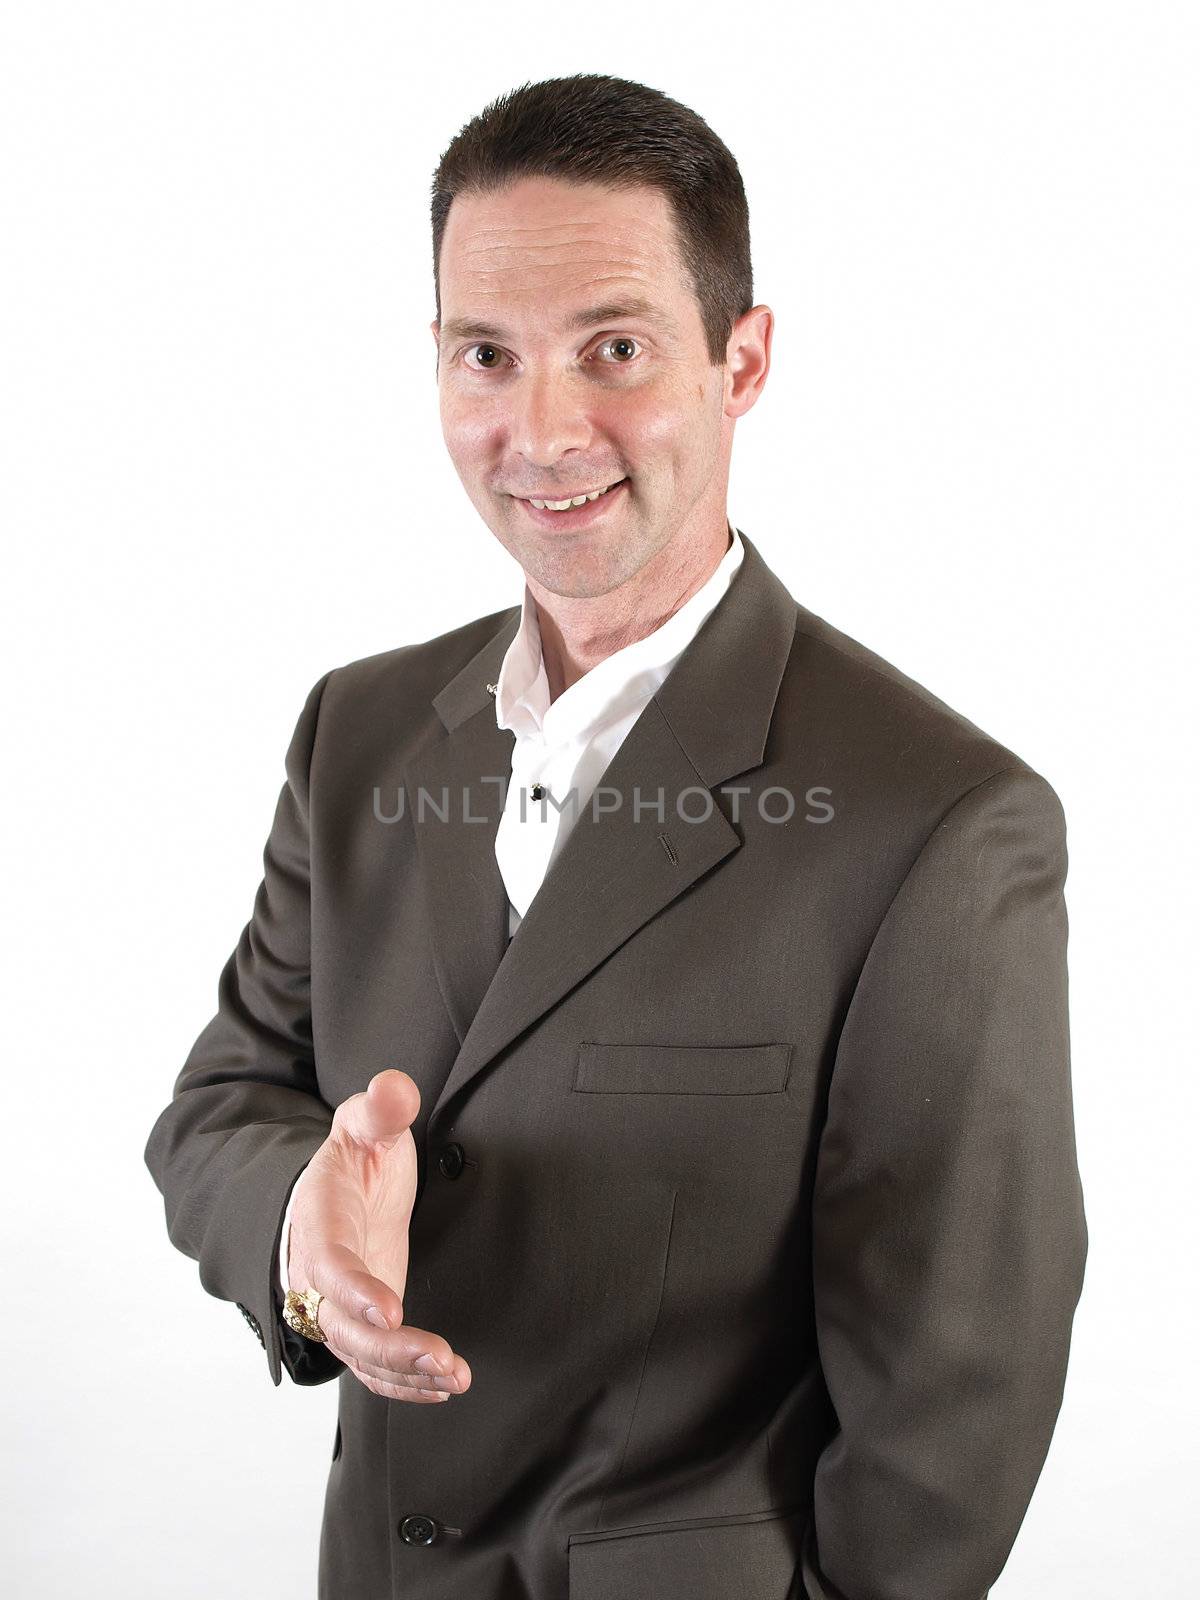 A smiling man in a business suit holds out his hand in a gesture of friendship.